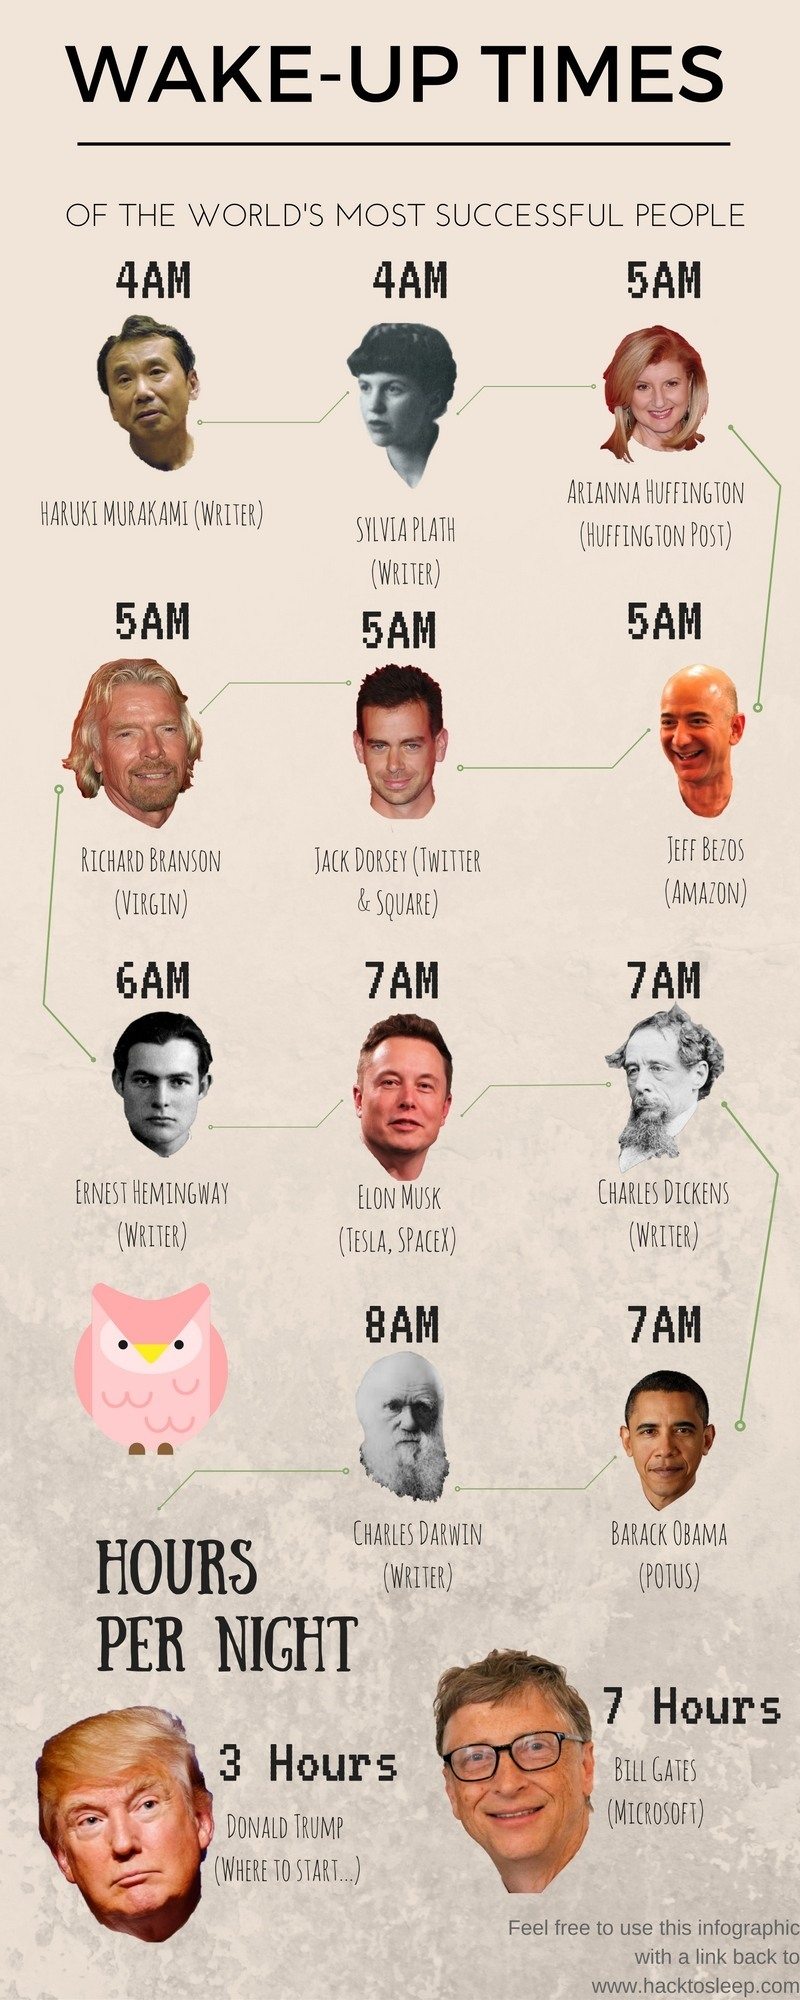 wake-up times of successful people